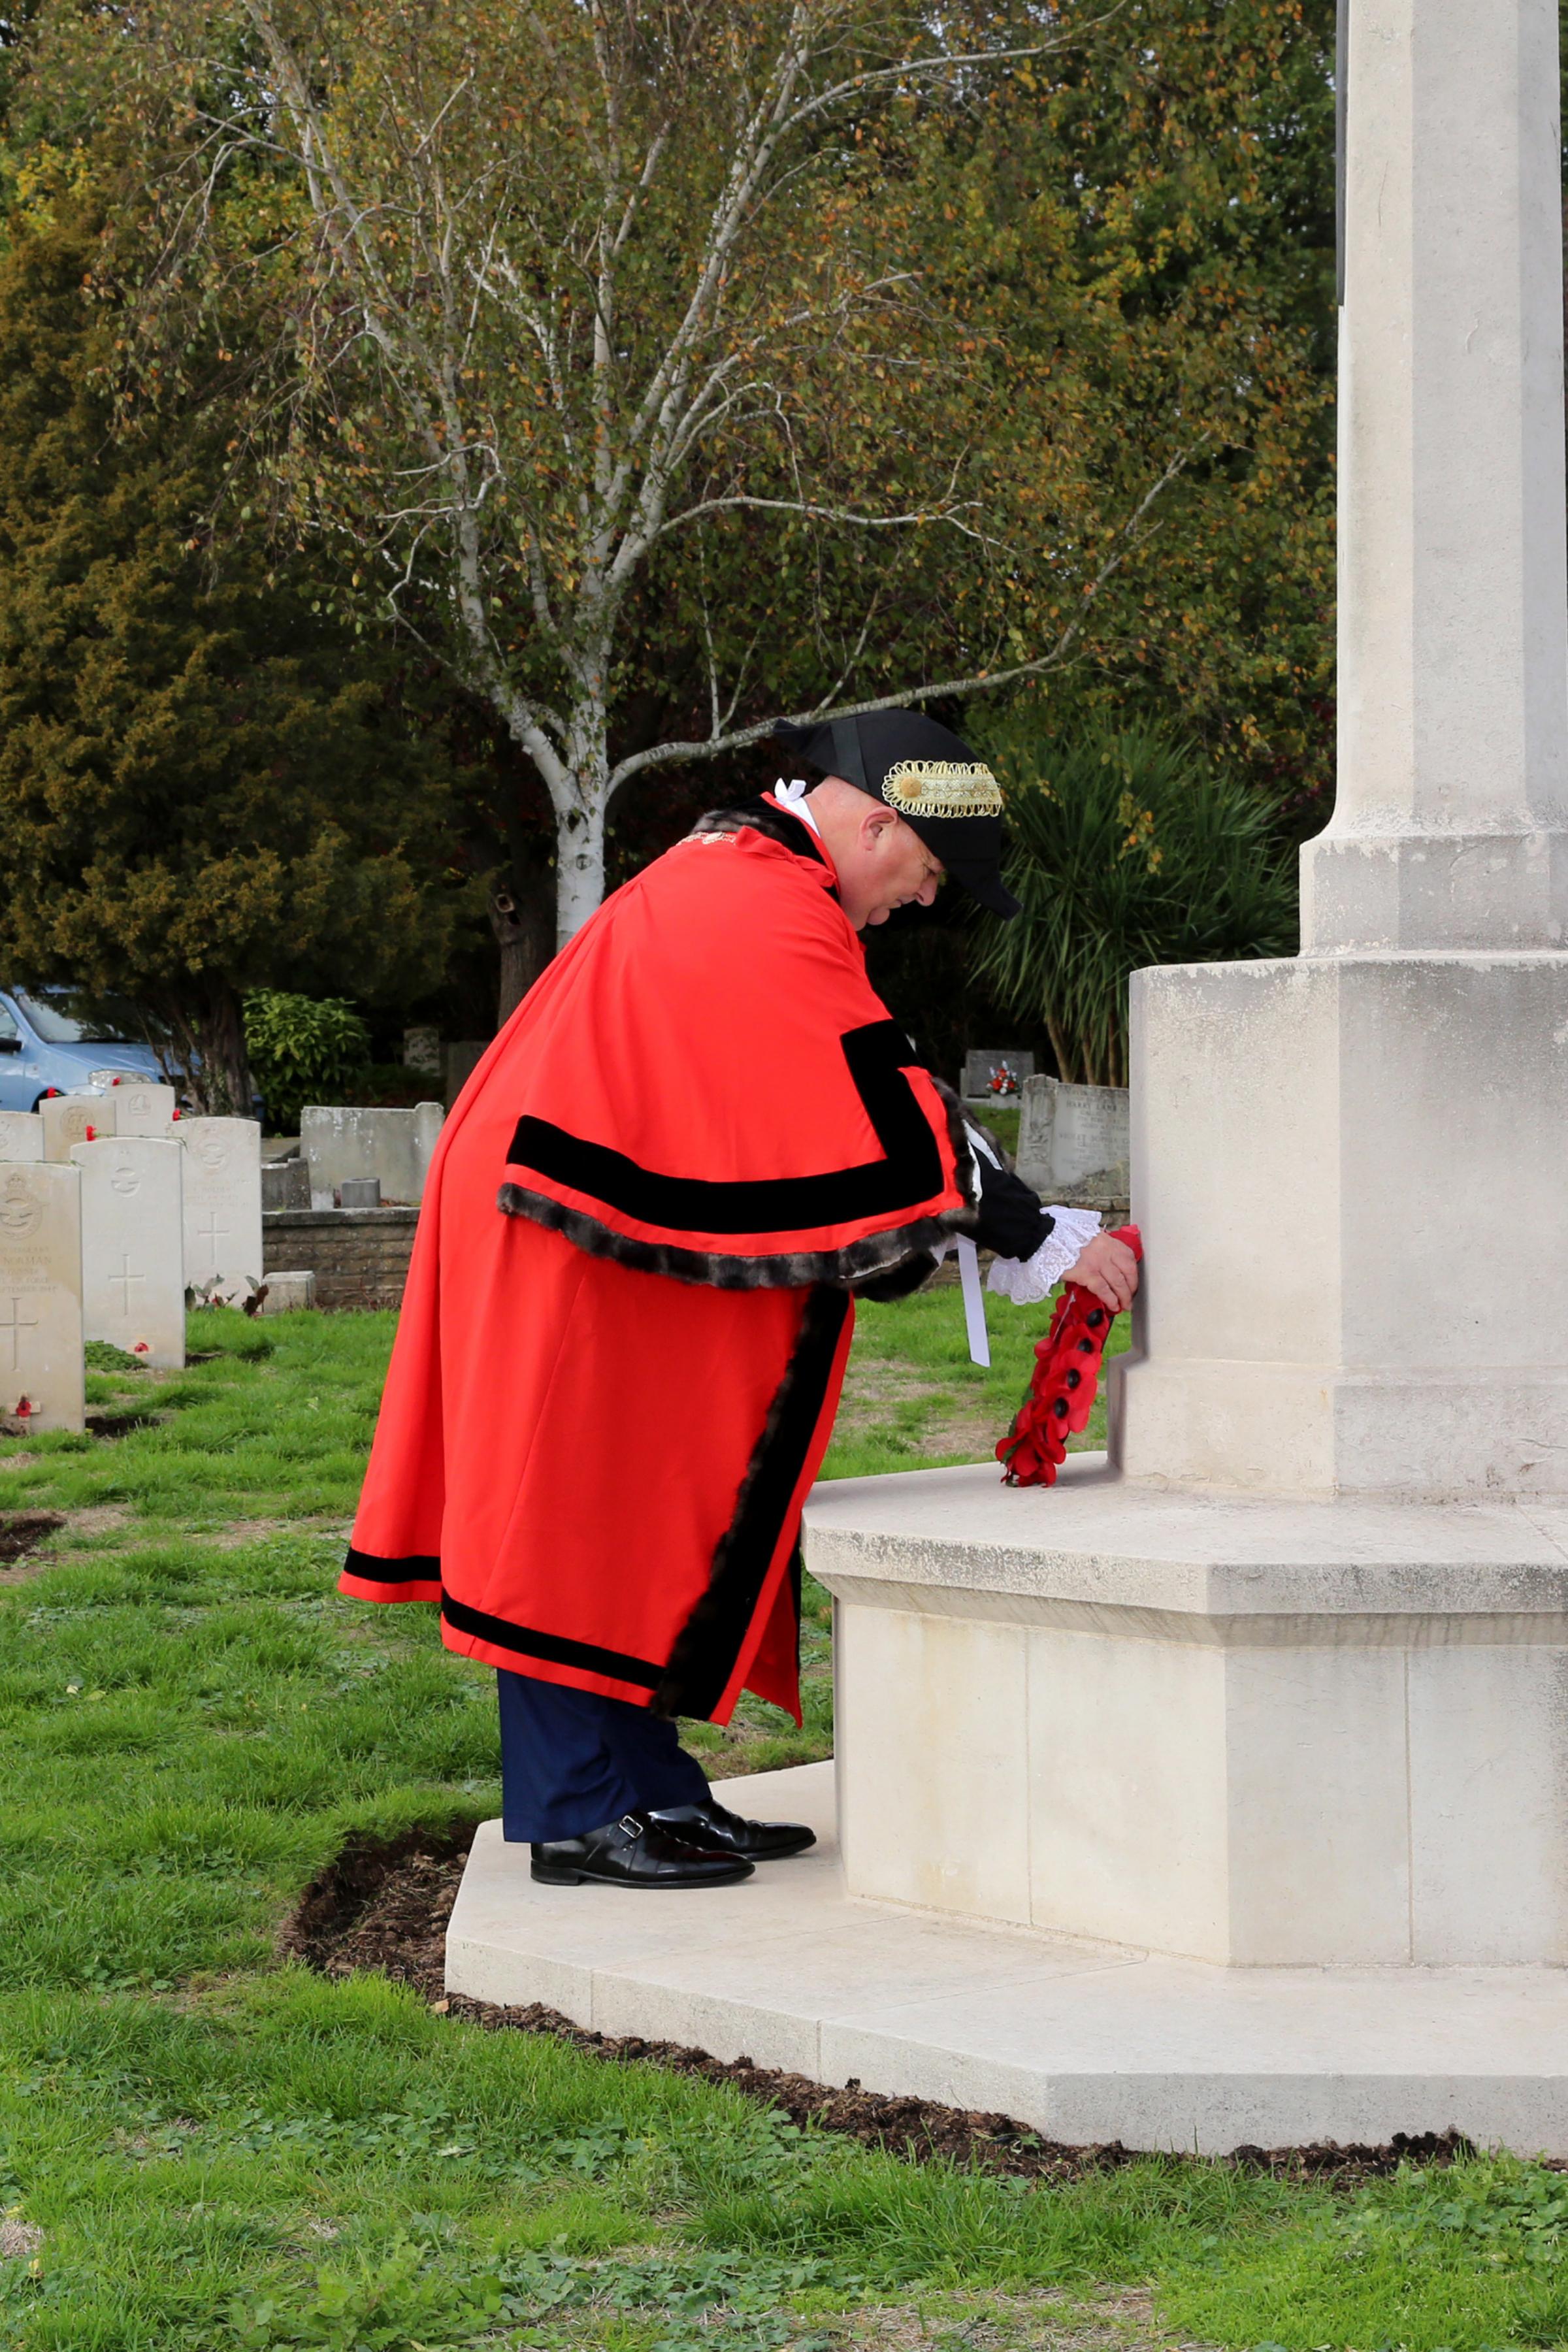 MAYOR CLLR TREVOR McKEEVER LAYS A WREATH ON BEHALF OF THE BOROUGH AT THE MEMORIAL IN HORNCHURCH CEMENTRY ON ARMISTICE DAY 11/11/22